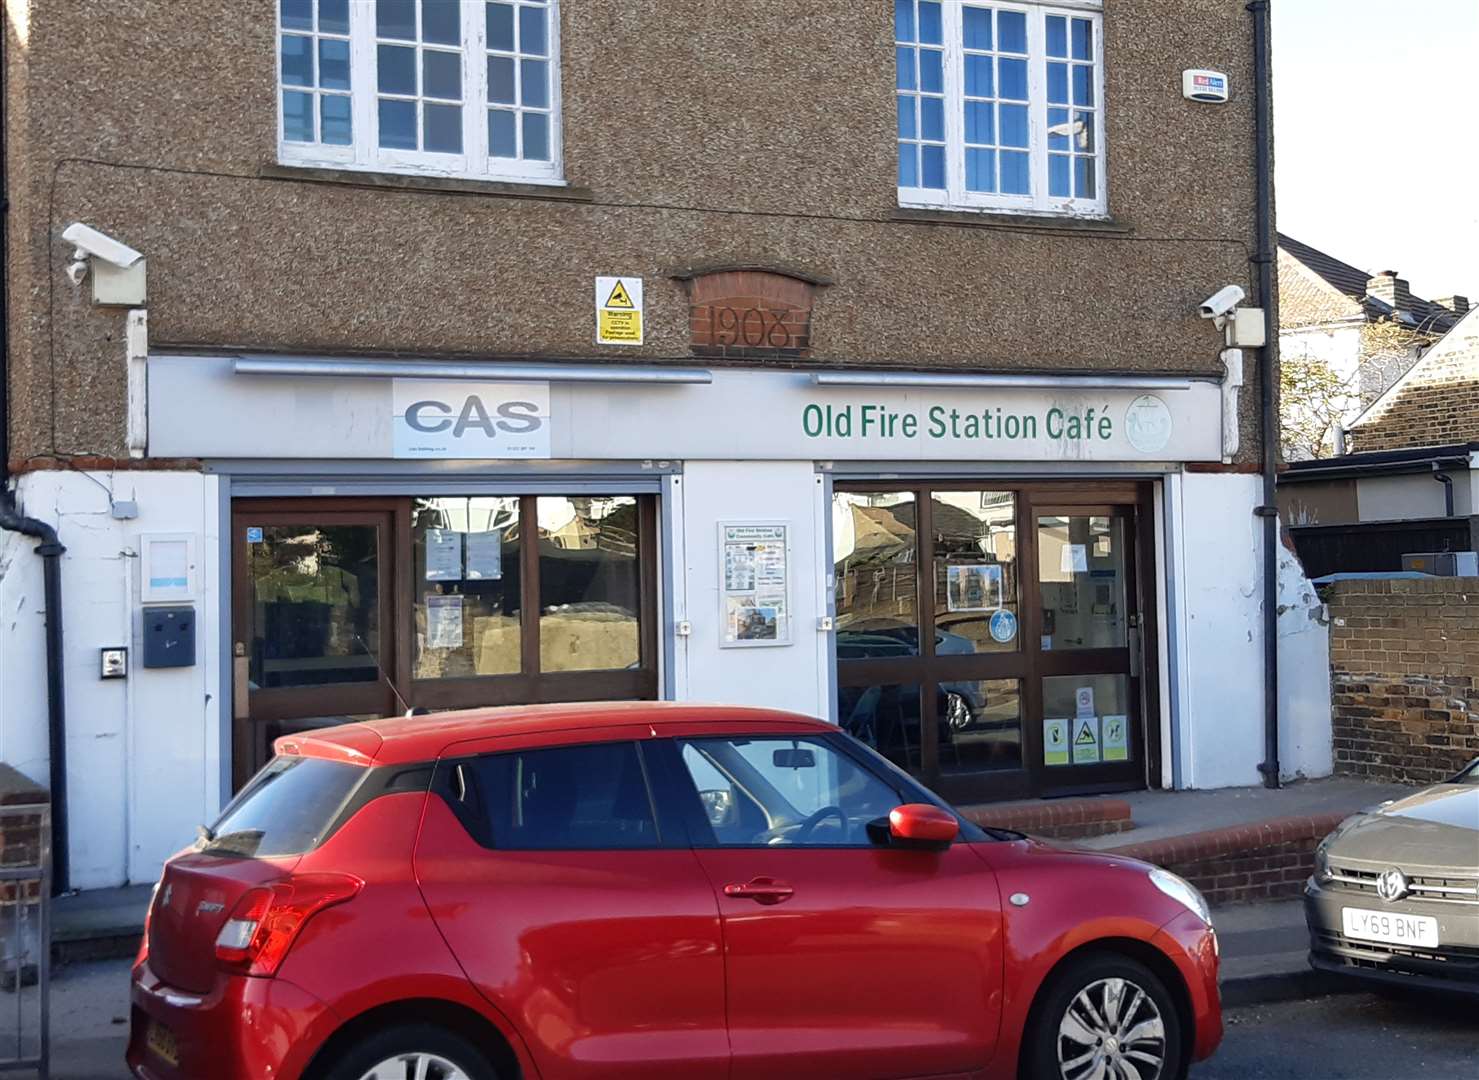 The Old Fire Station Cafe in Swanscombe which was formerly occupied by the town's library. Photo: Sean Delaney